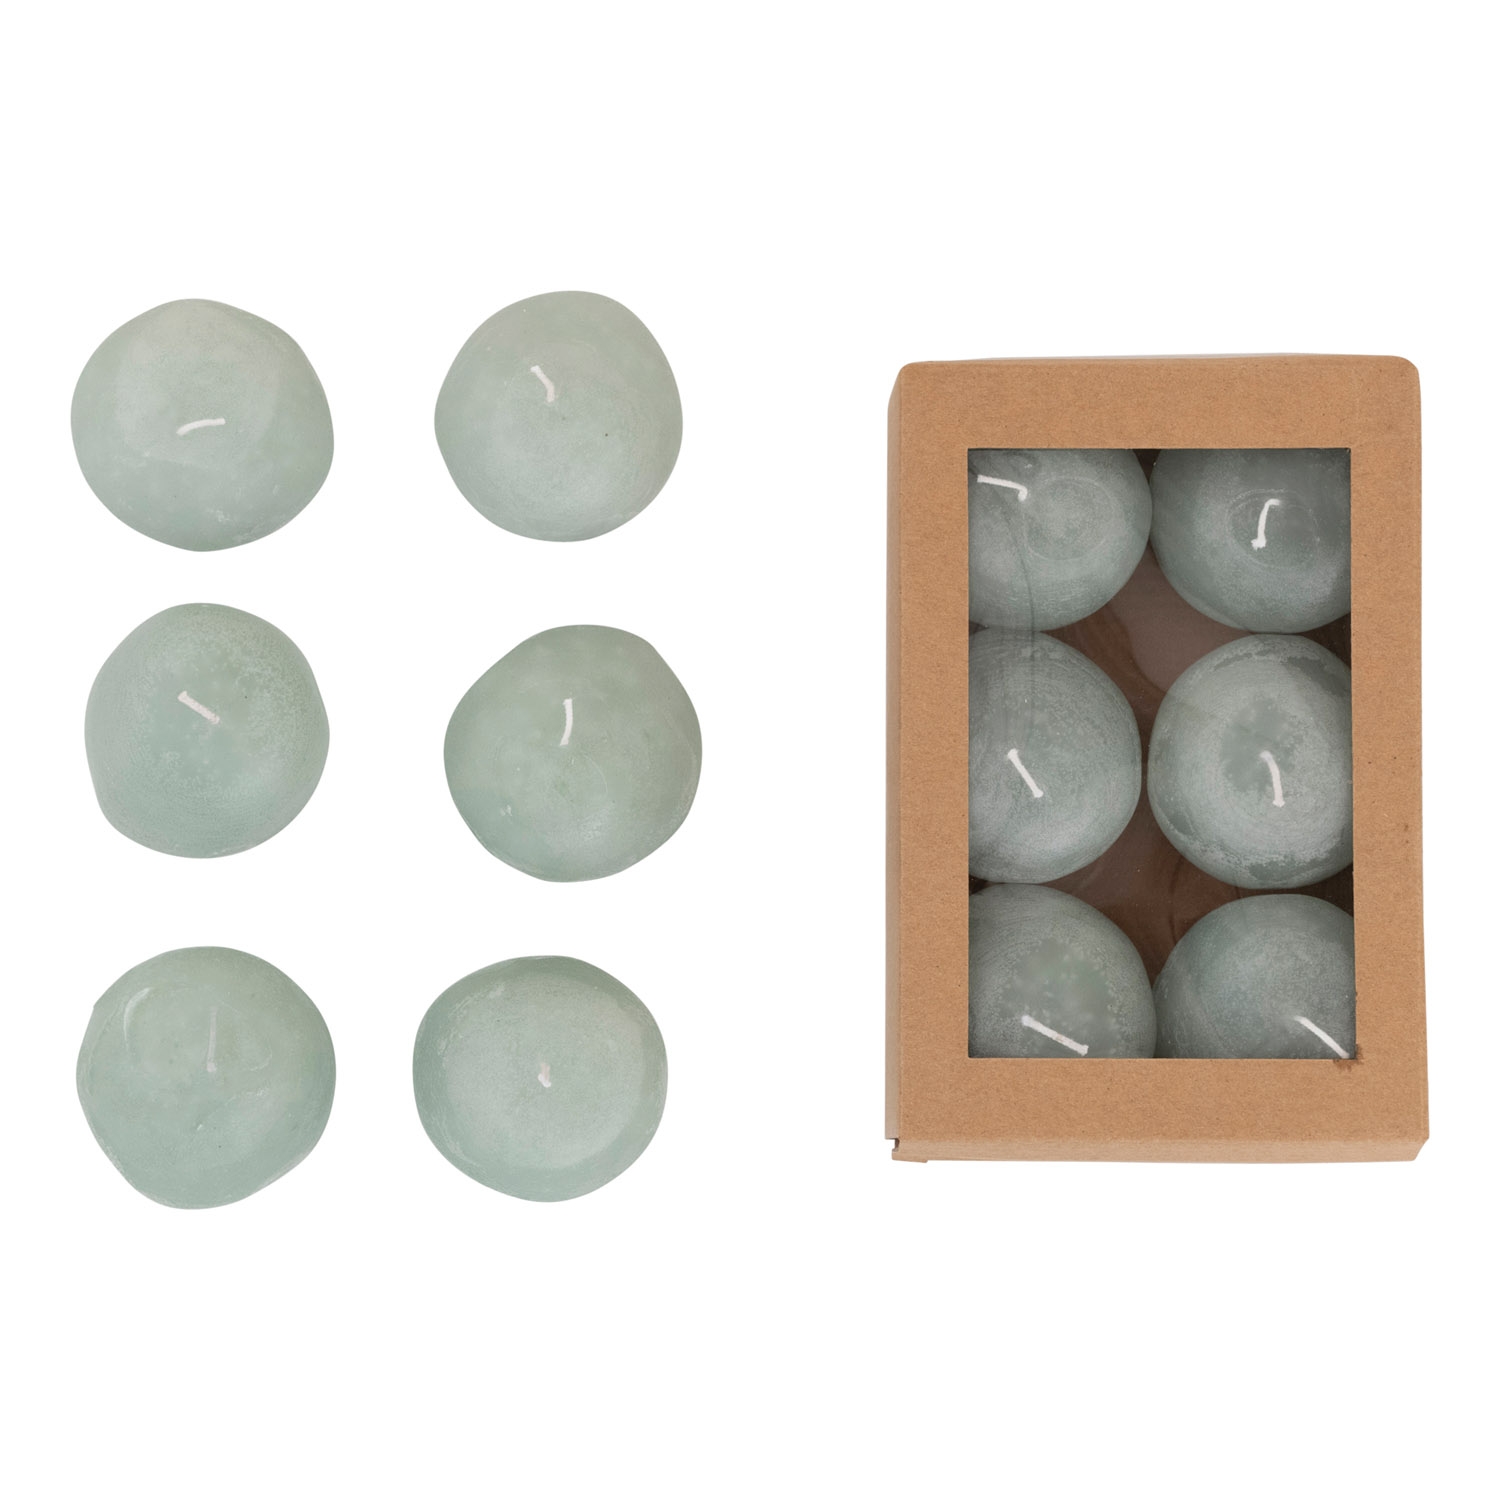 Unscented Stone Shaped Votive Candles in Box, Set of 6 - Image 0